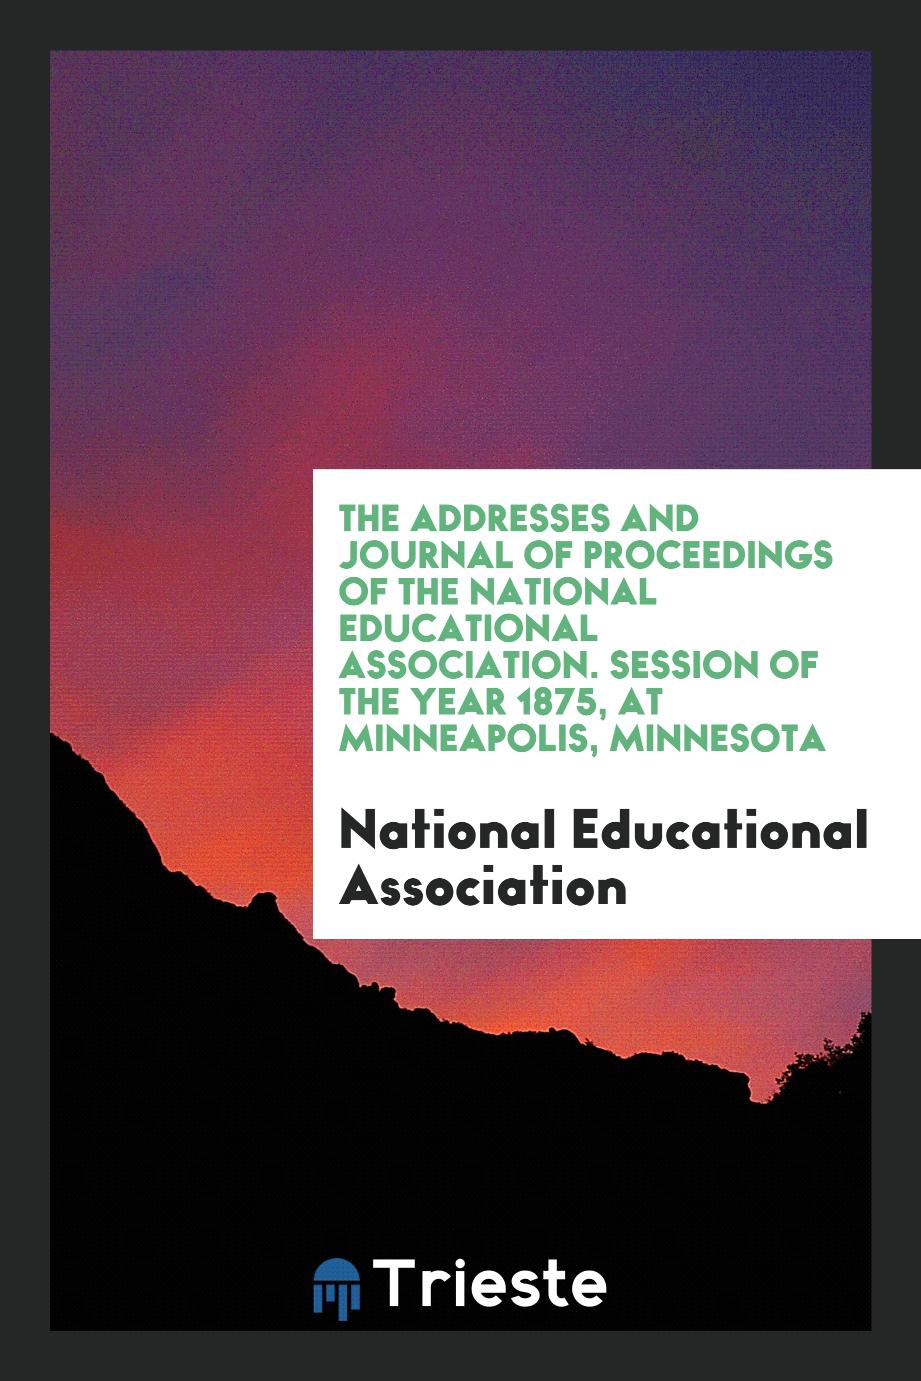 The Addresses and Journal of Proceedings of the National Educational Association. Session of the Year 1875, at Minneapolis, Minnesota